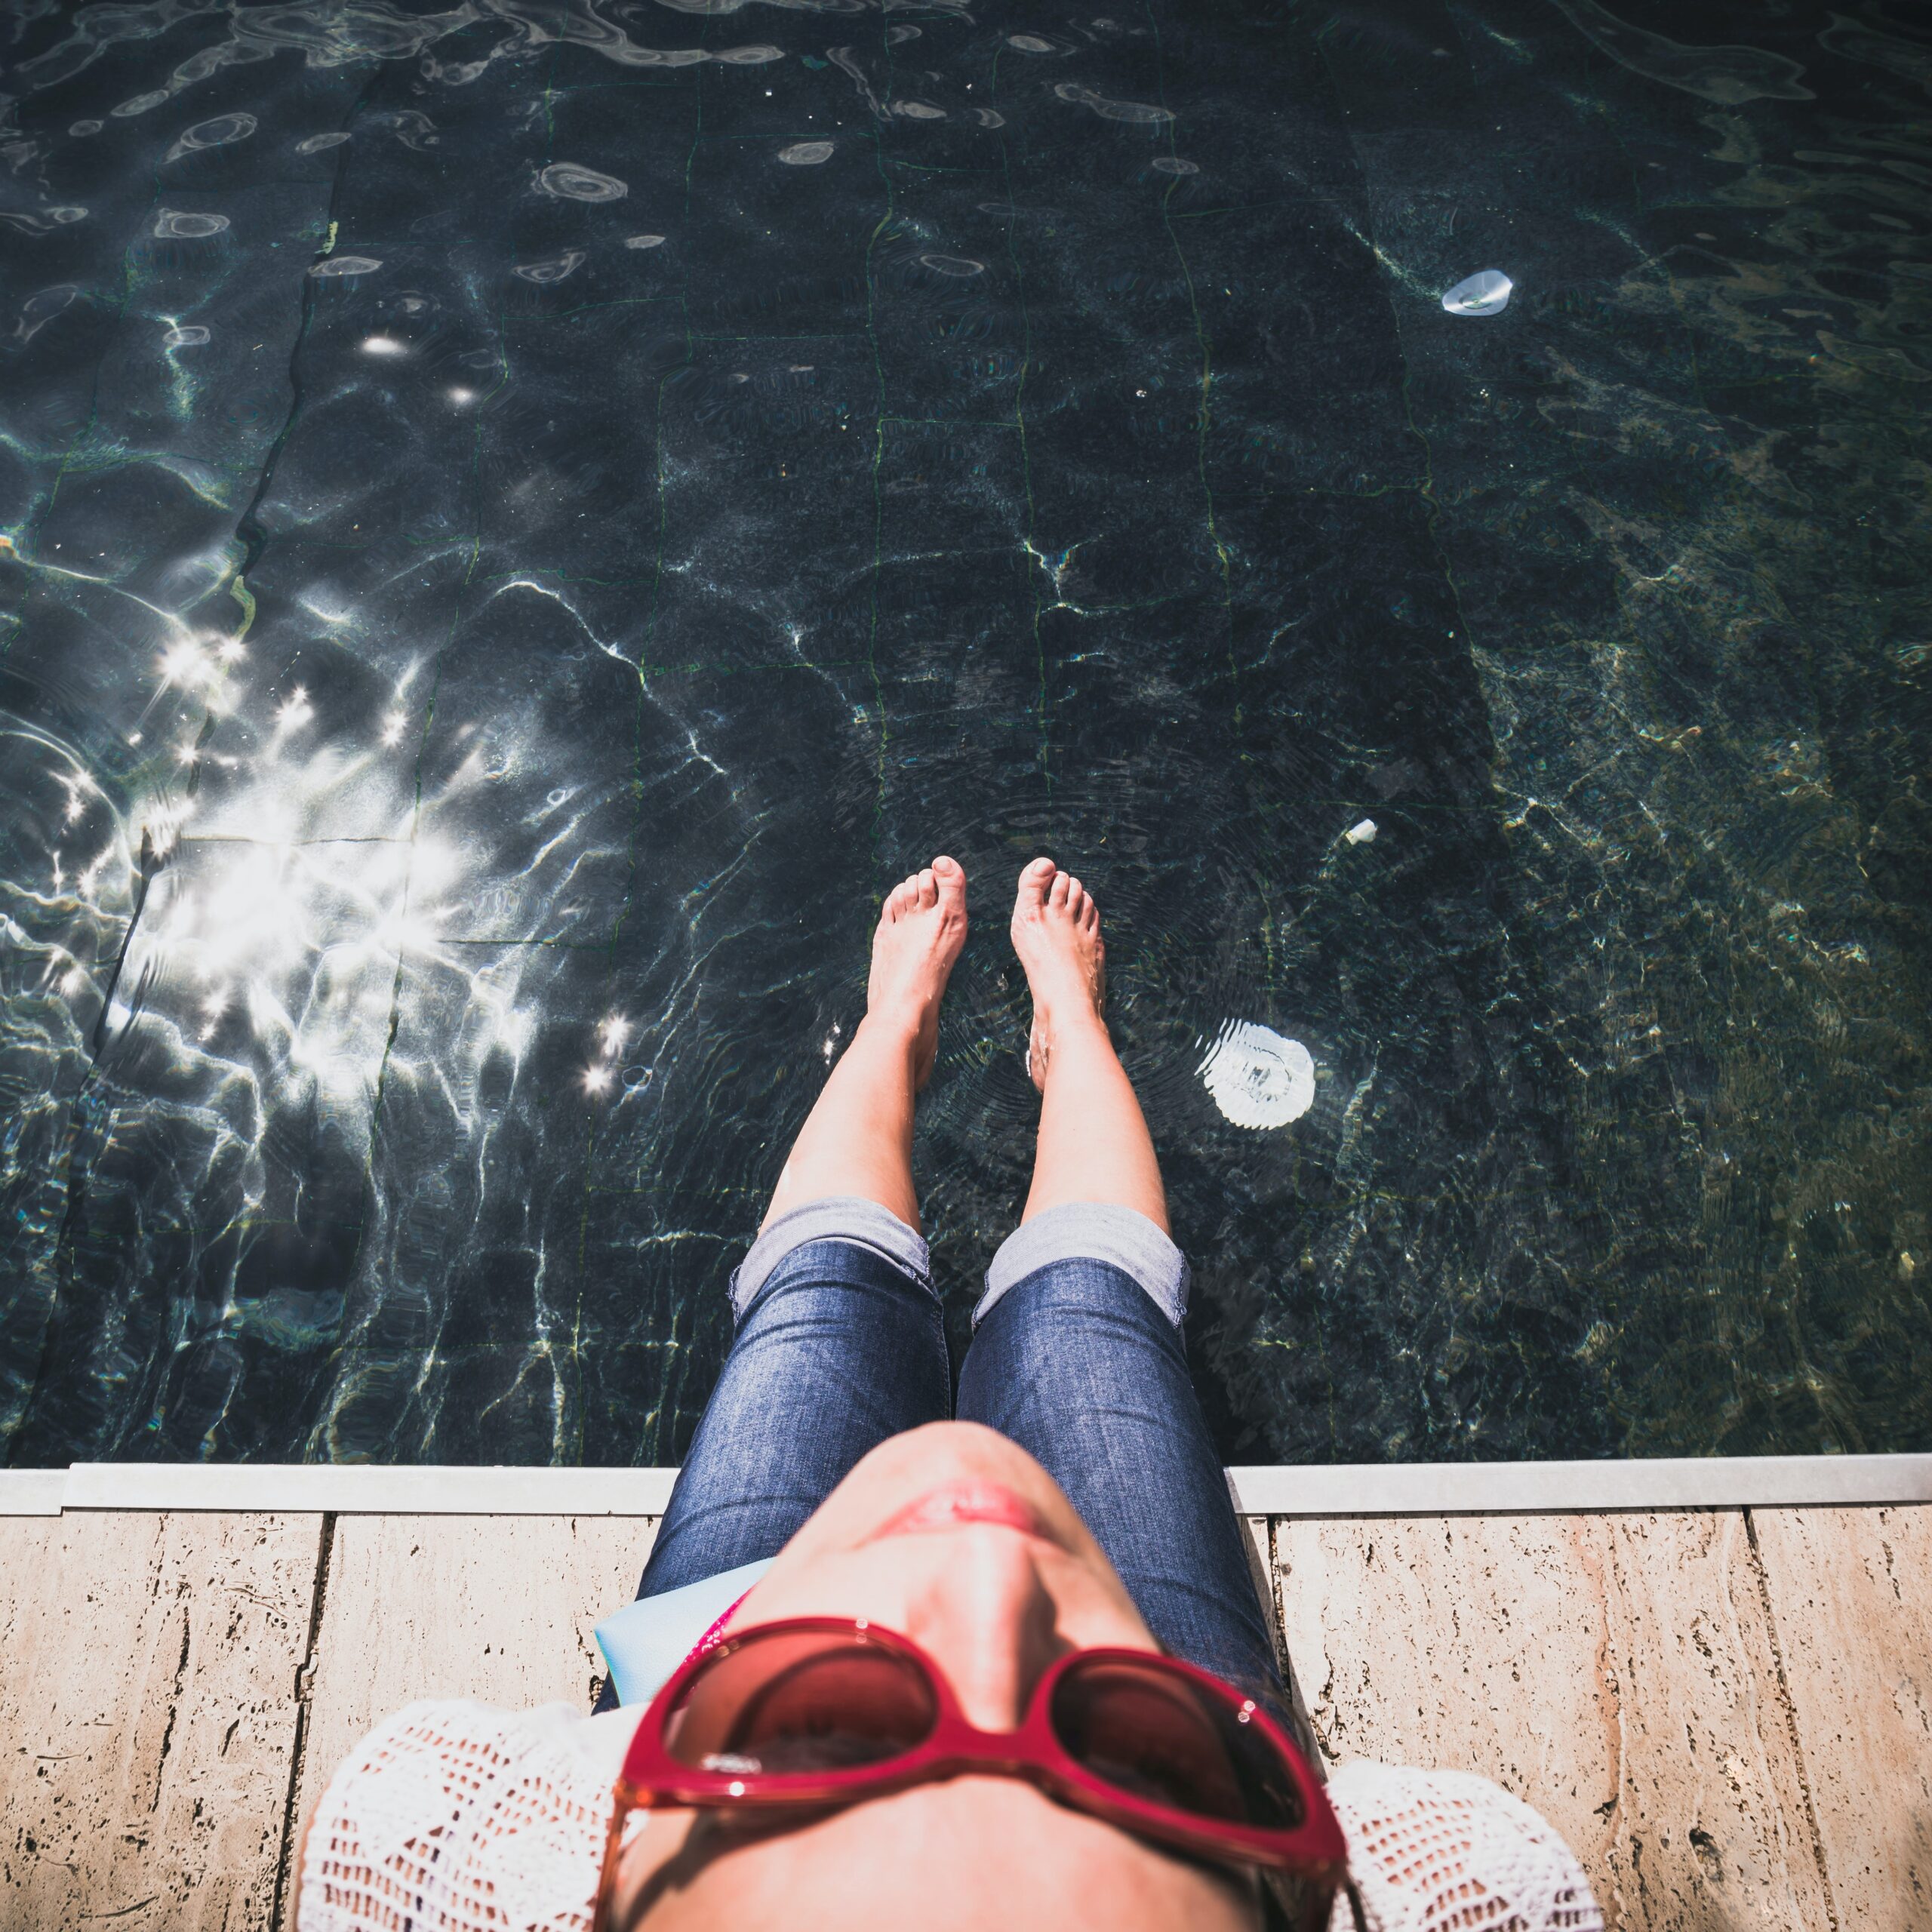 An aerial view of a lady wearing jeans rolled to her knees and red sunglasses with feet dangling in the water face up to the sun